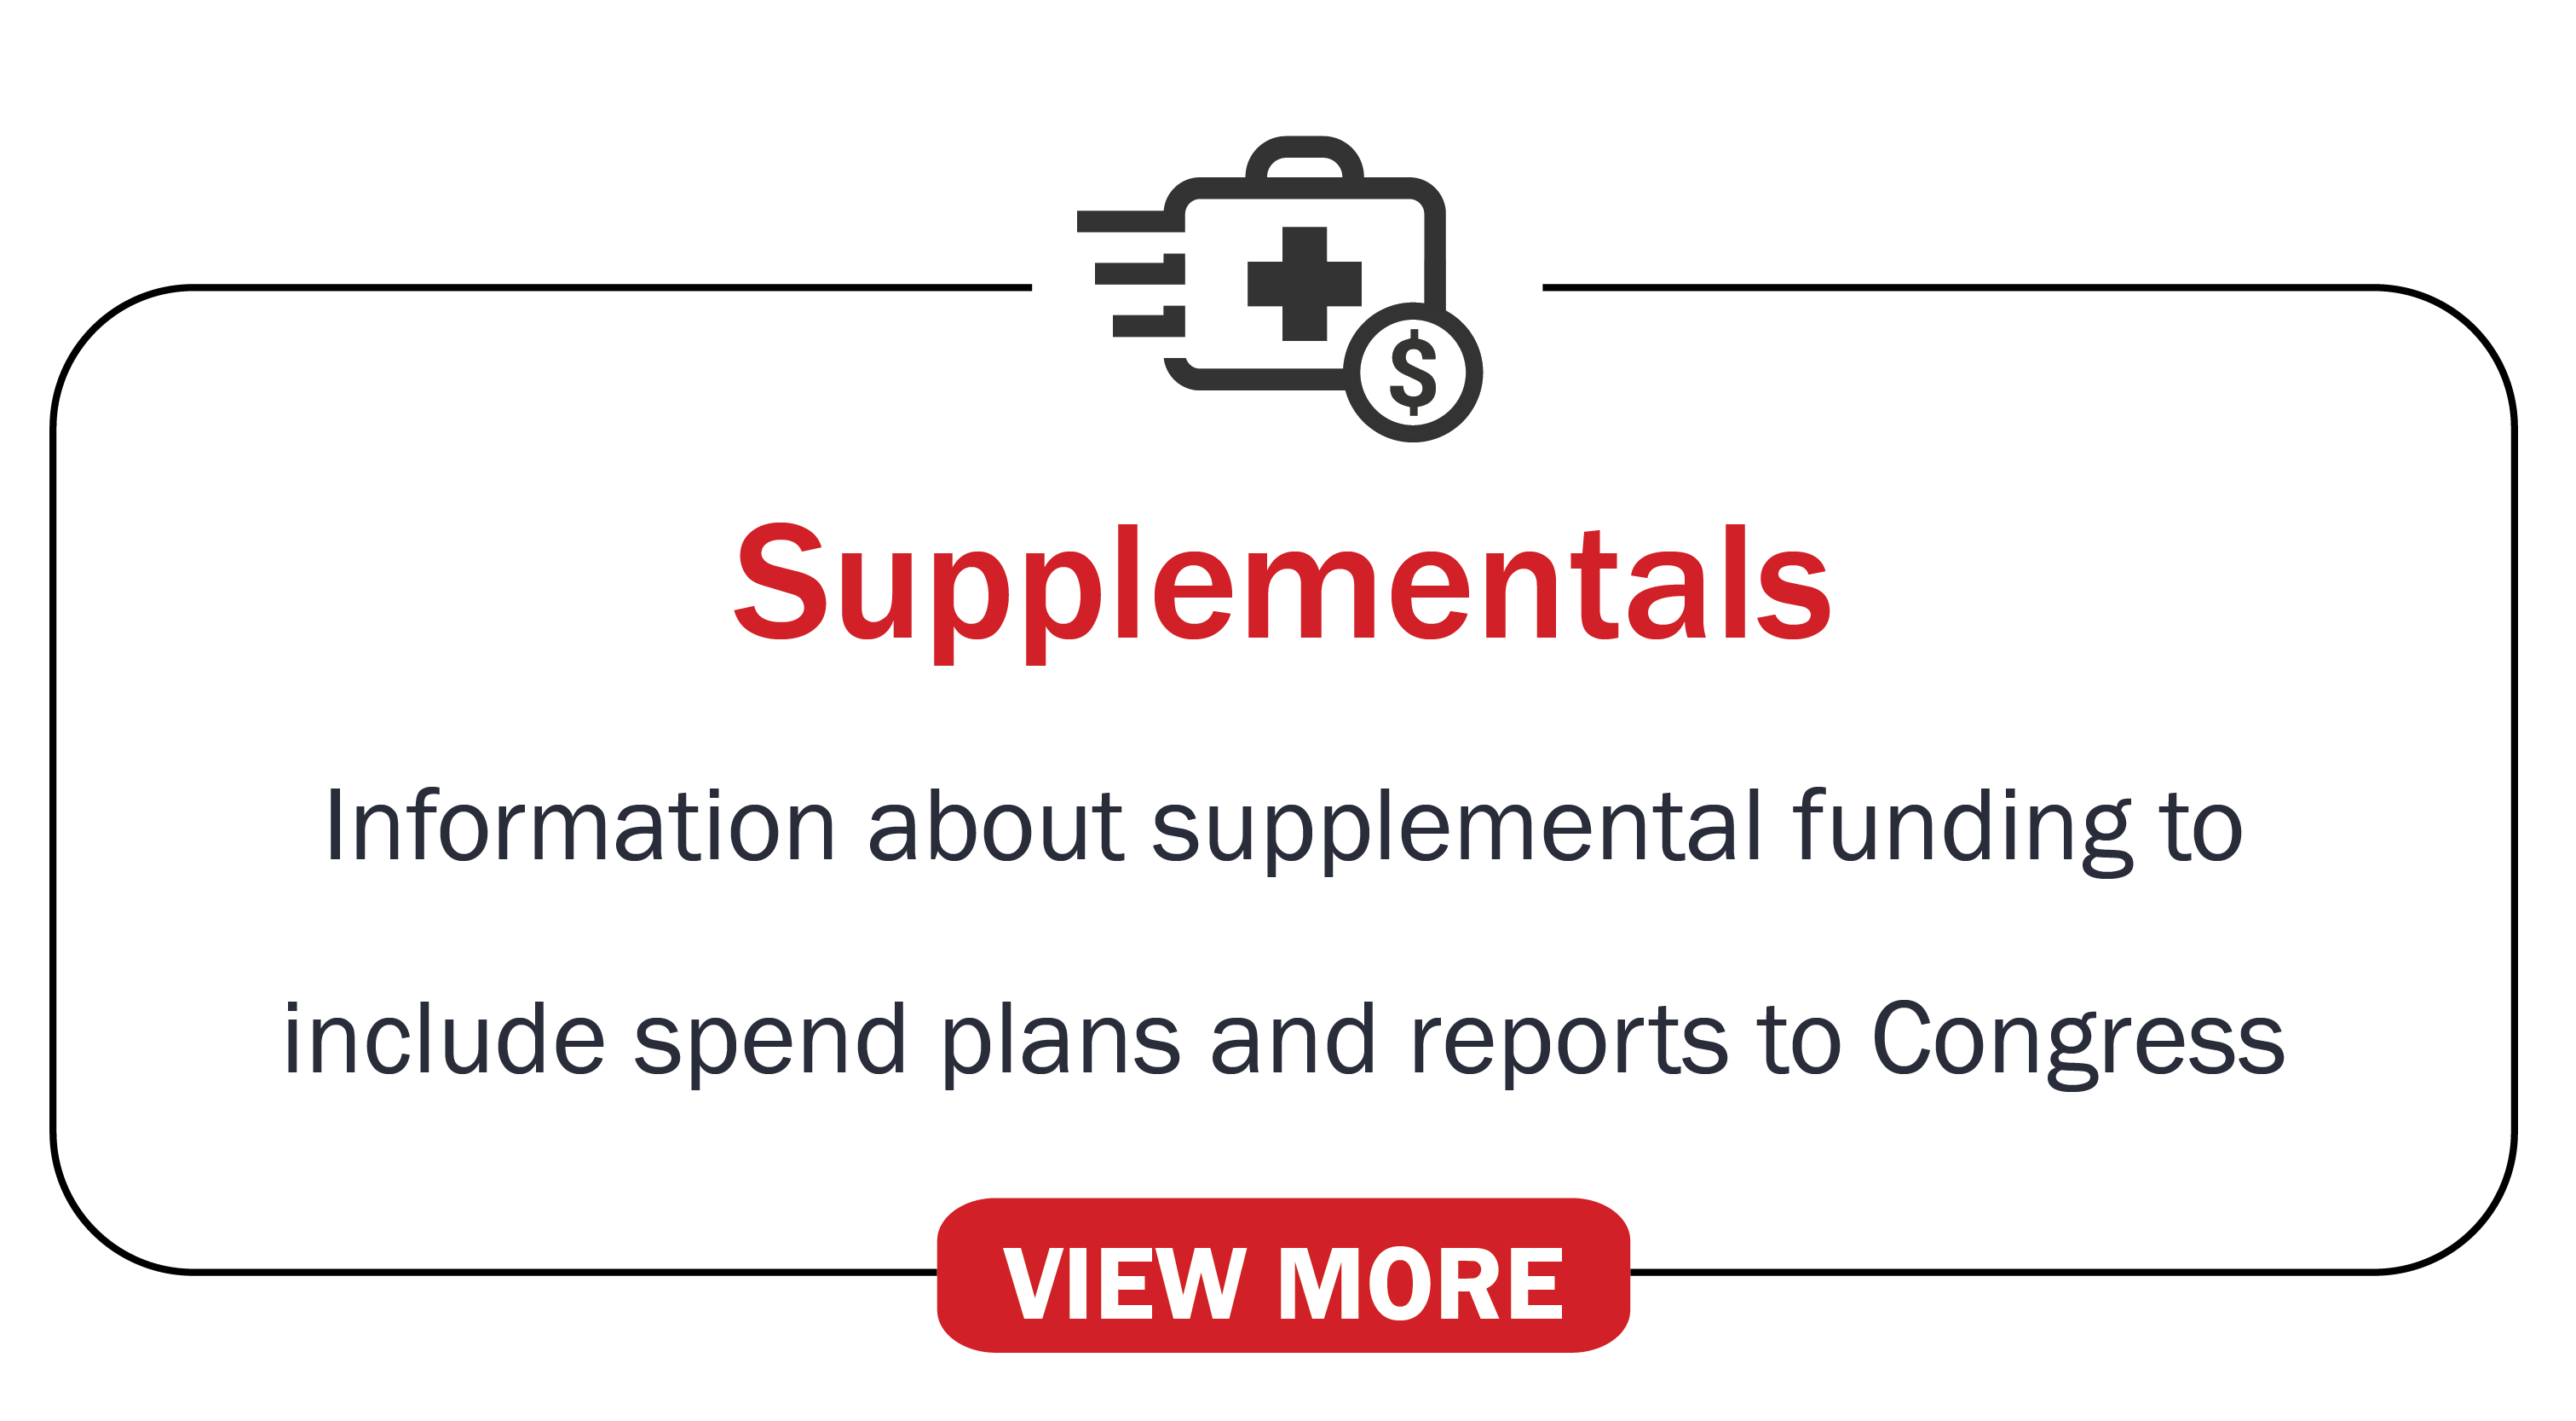 Supplemental Work: Information about supplemental funding to include spend plans and reports to Congress